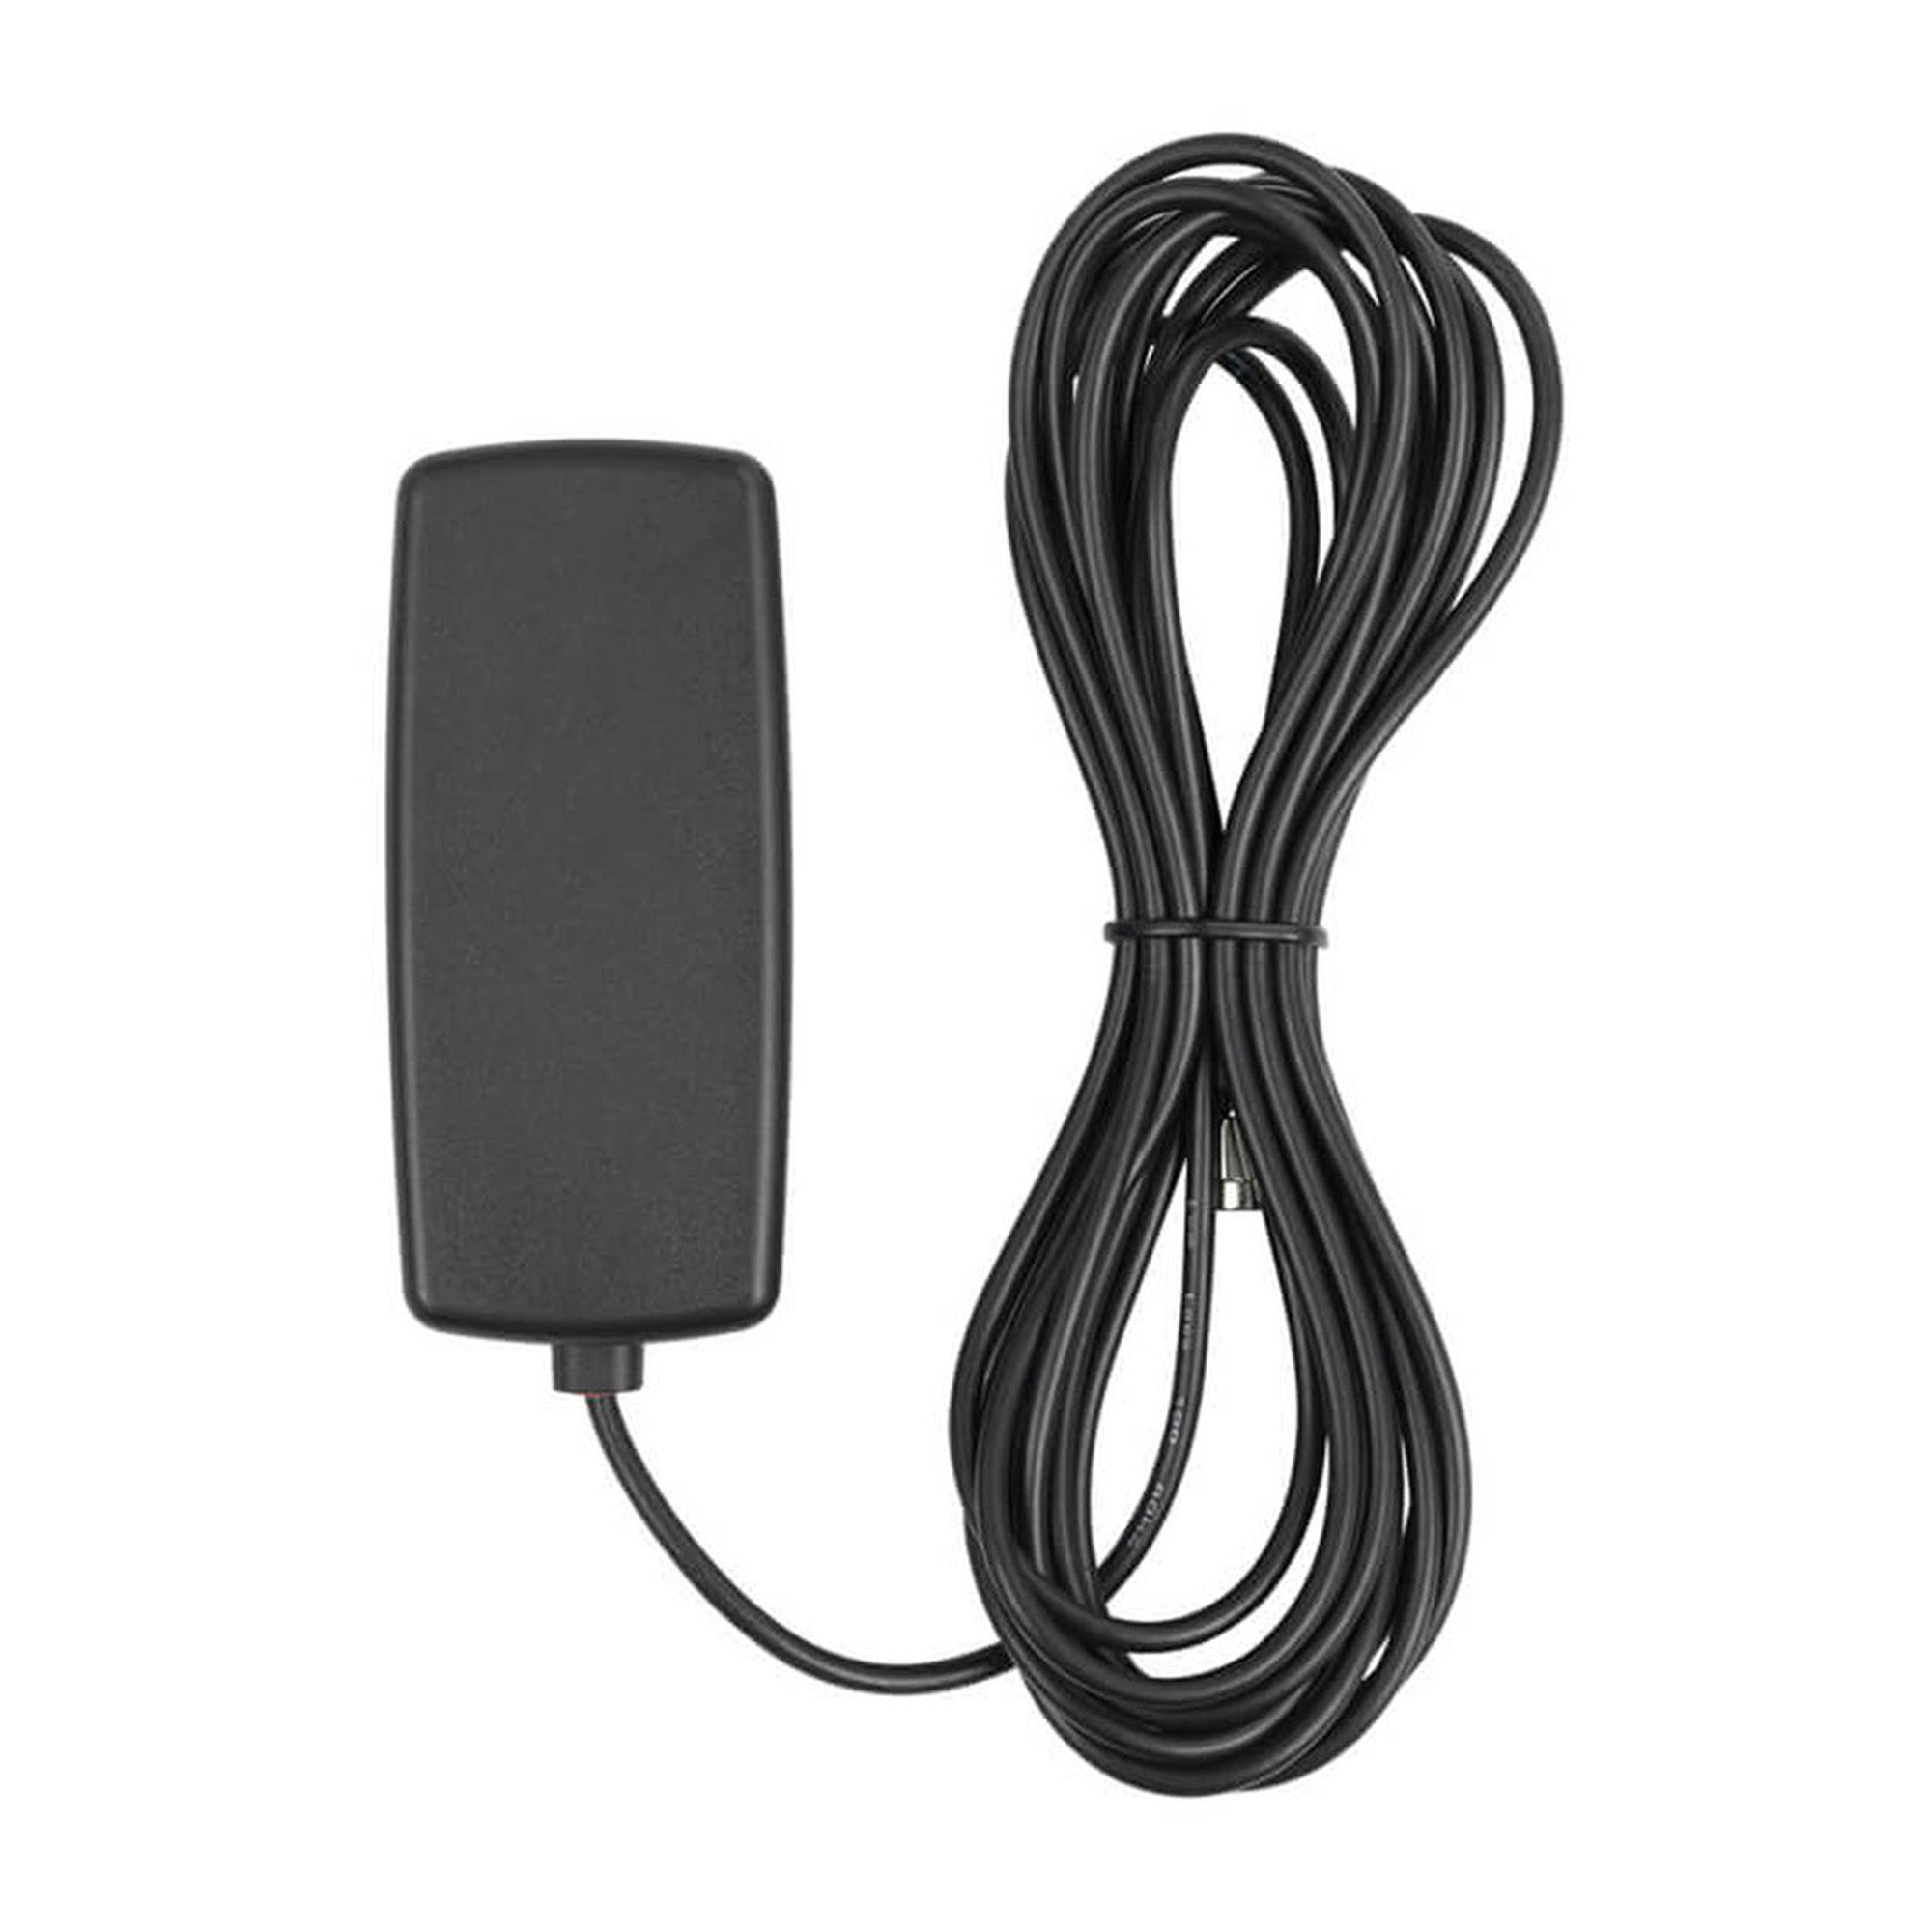 weBoost In-Vehicle Antenna for Drive Reach w/ SMB Connector